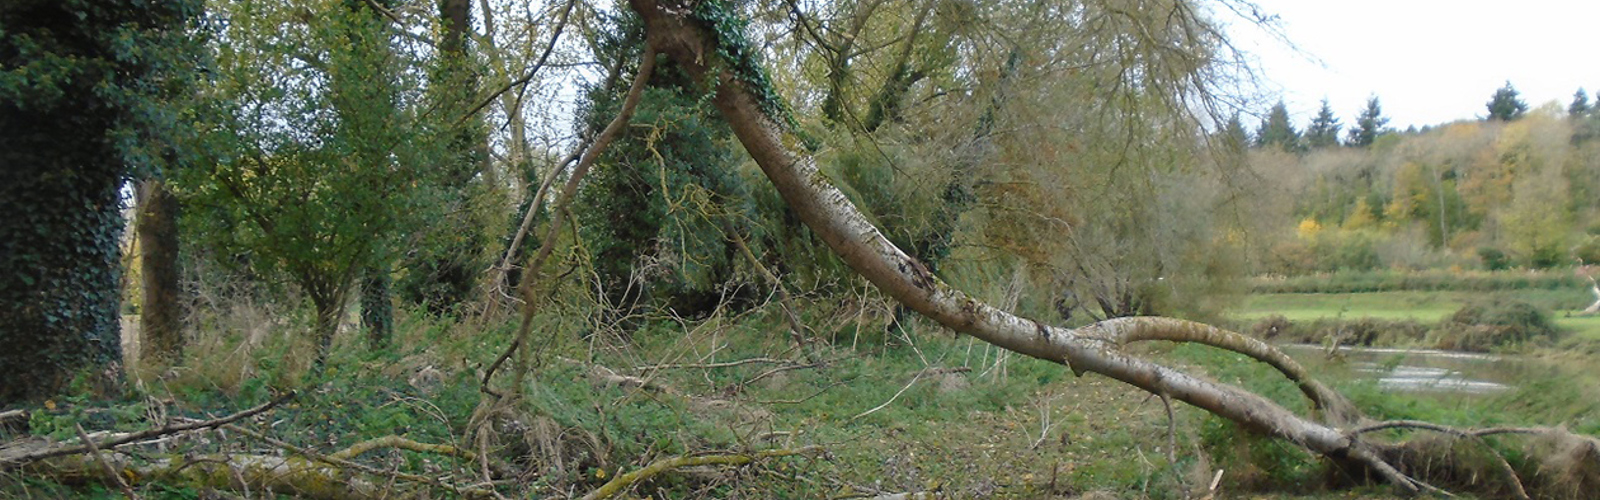 Fallen tree branch which caused injury